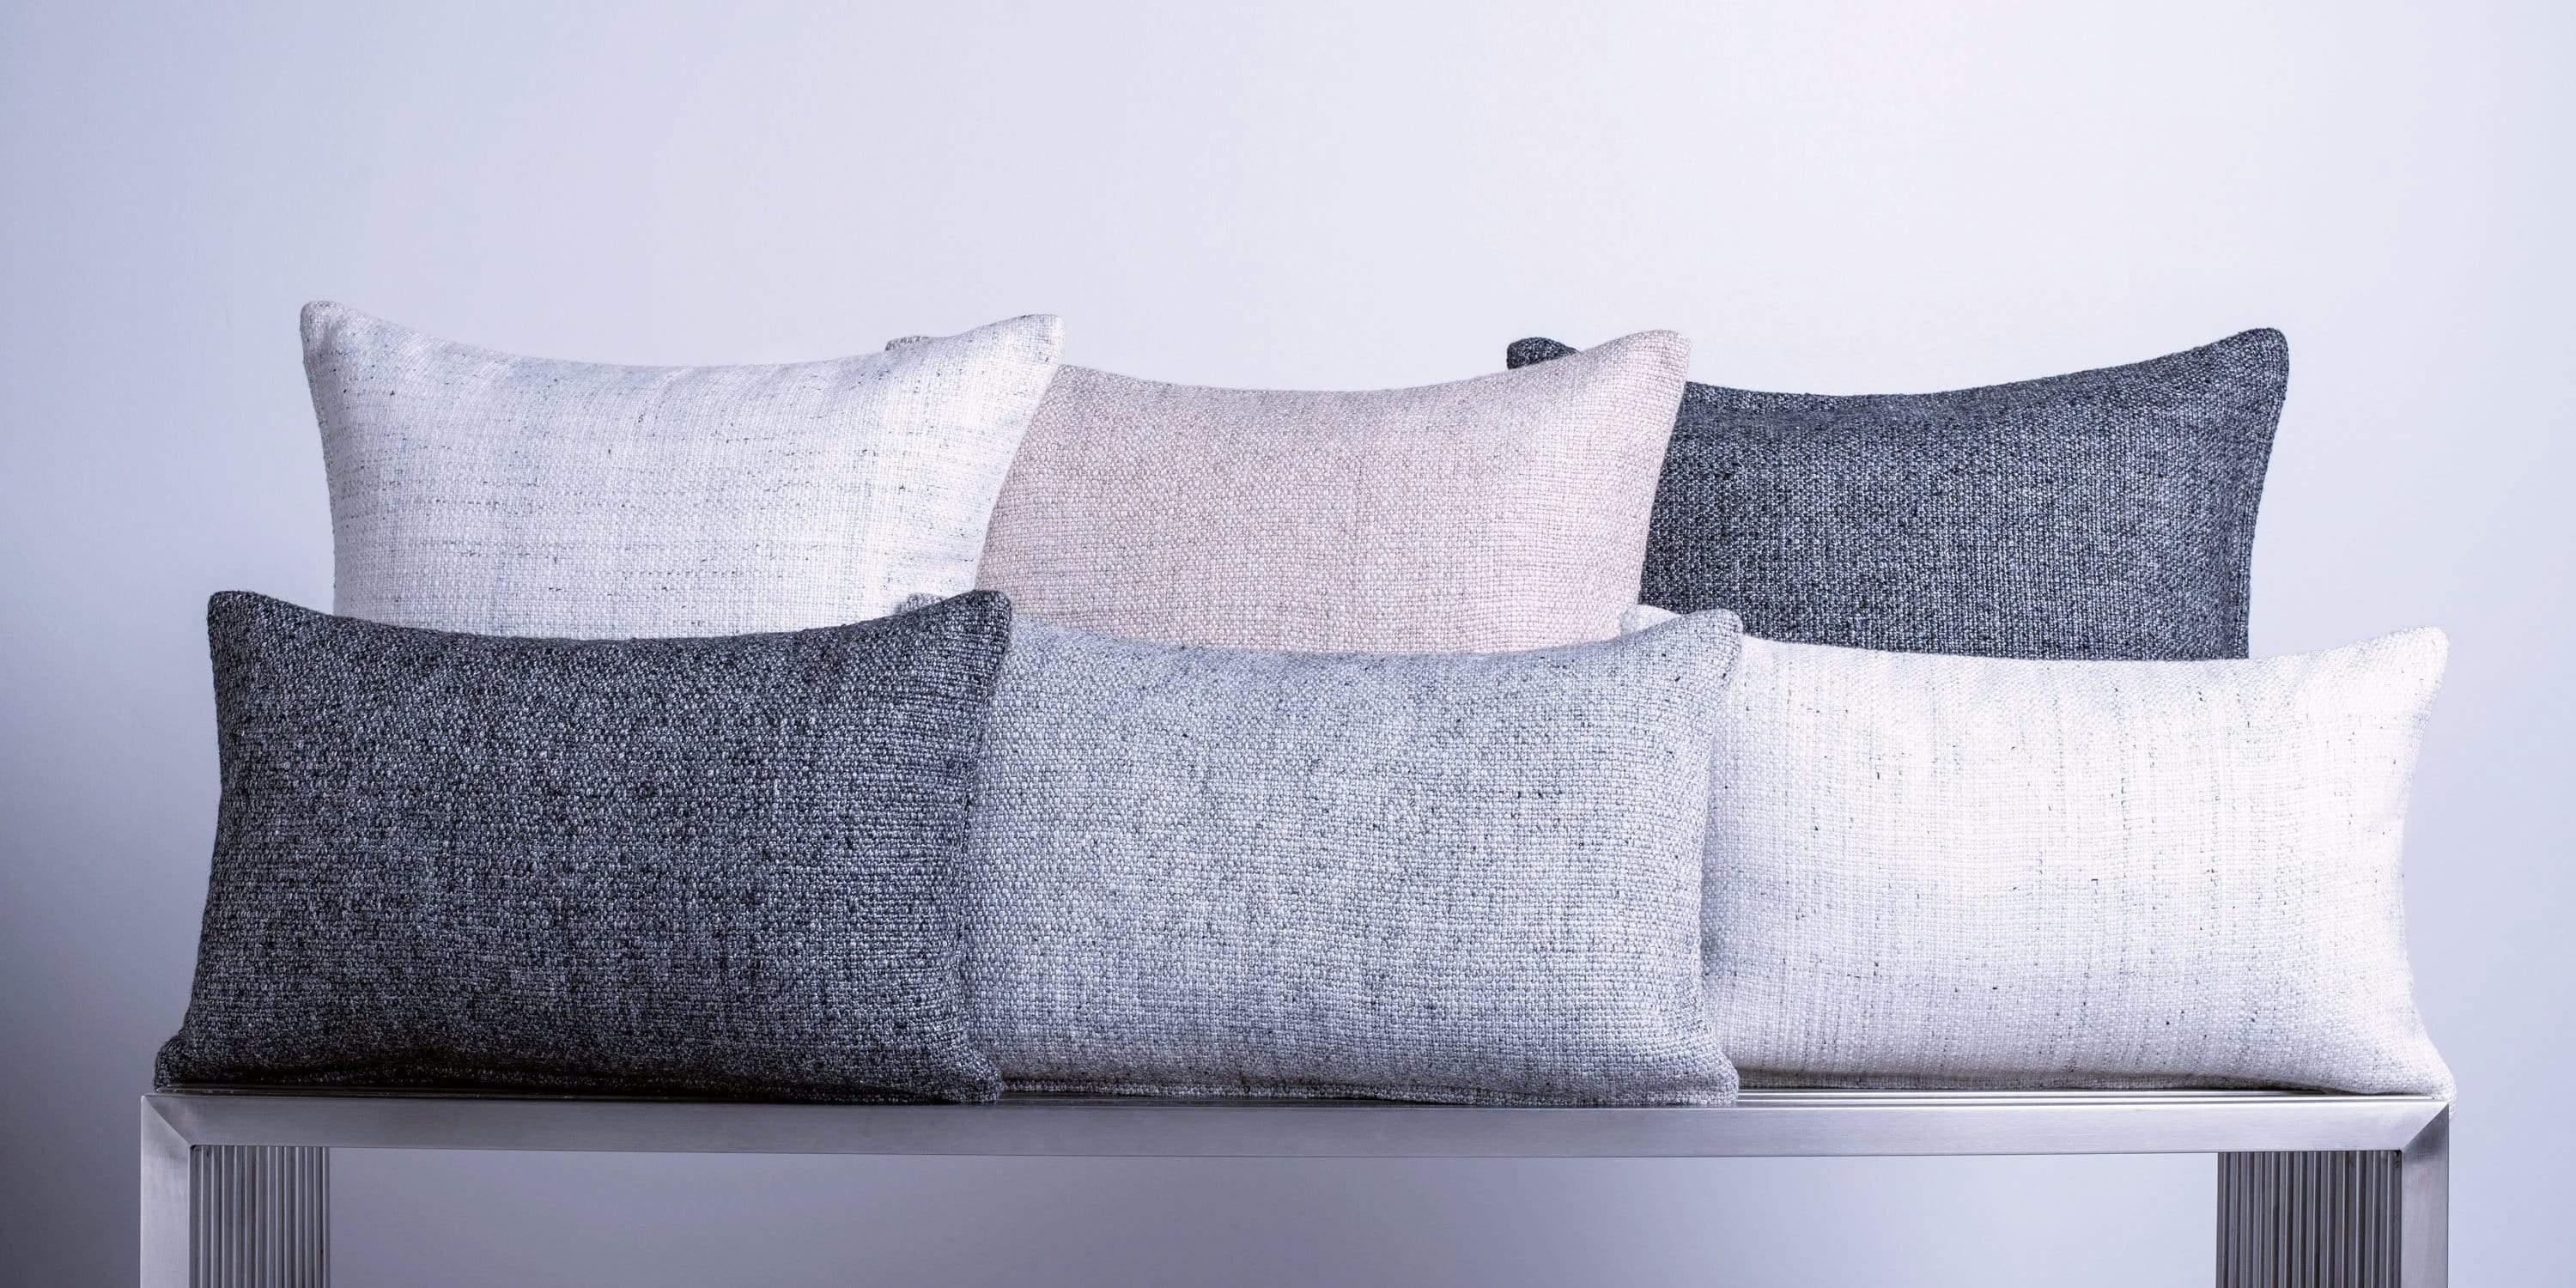 A finely woven nubby texture adds depth to your design. Subtly variegated tones, in a classic palette, add a touch of warmth to any room. Layer with our solid cashmere pillows for contrast. Pillow insert sold separately.

Size 13